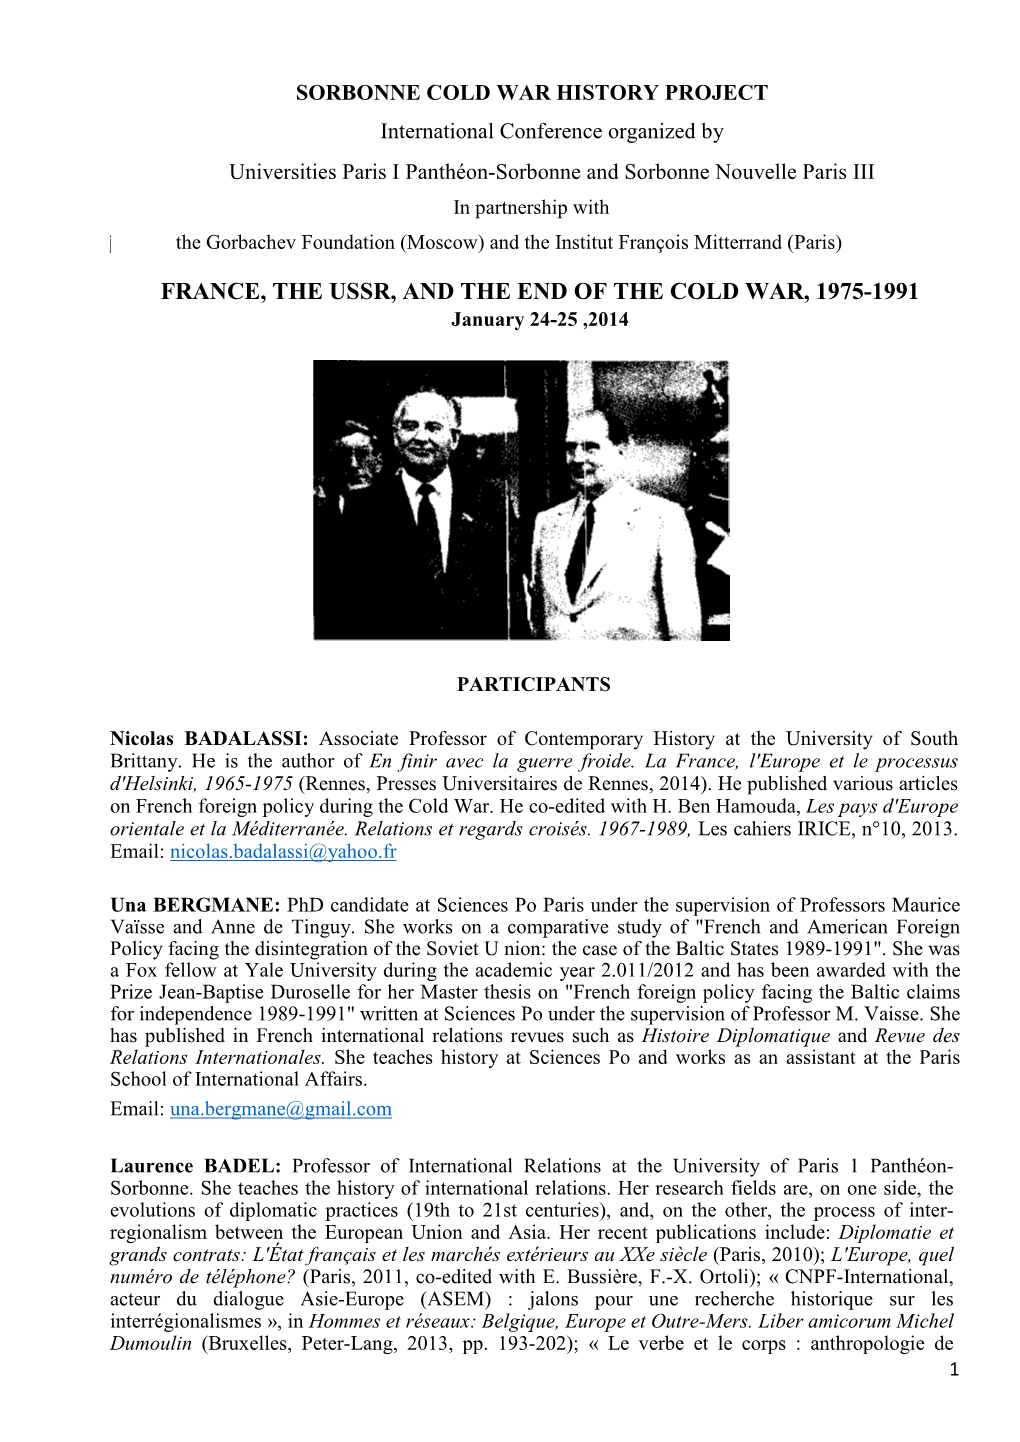 FRANCE, the USSR, and the END of the COLD WAR, 1975-1991 January 24-25 ,2014